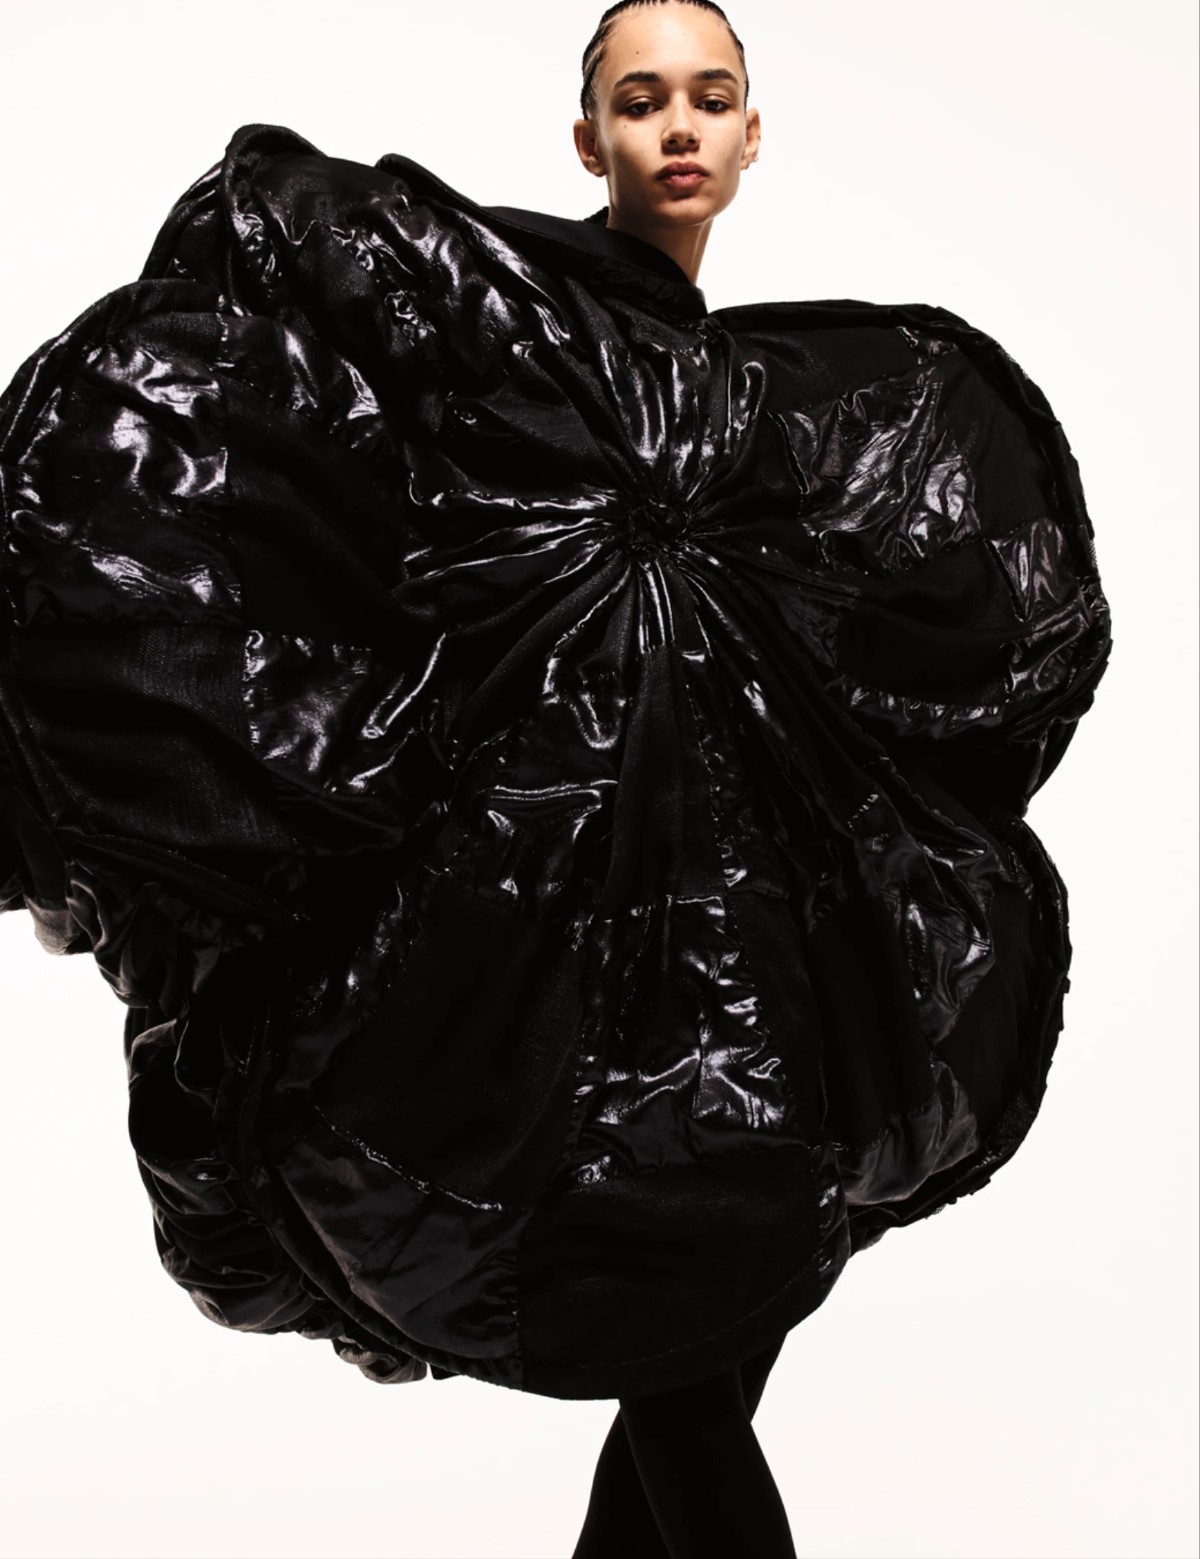 Binx Walton in Comme des Garçons on i-D Magazine Issue 367 by Amy Troost